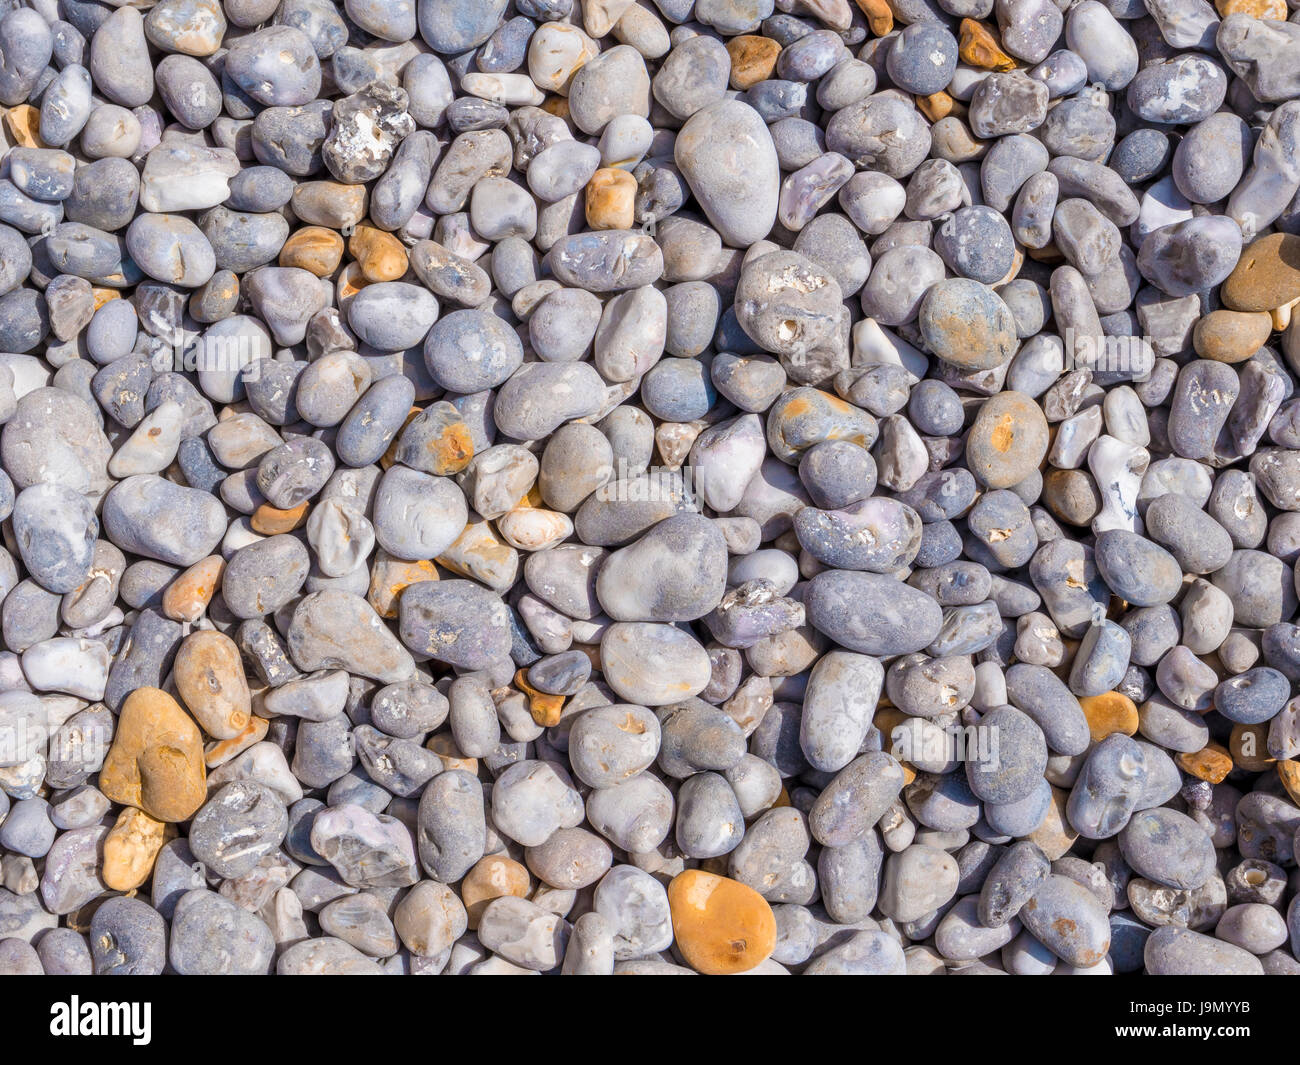 Background of smooth pebbles in different colors and sizes on the beach Stock Photo